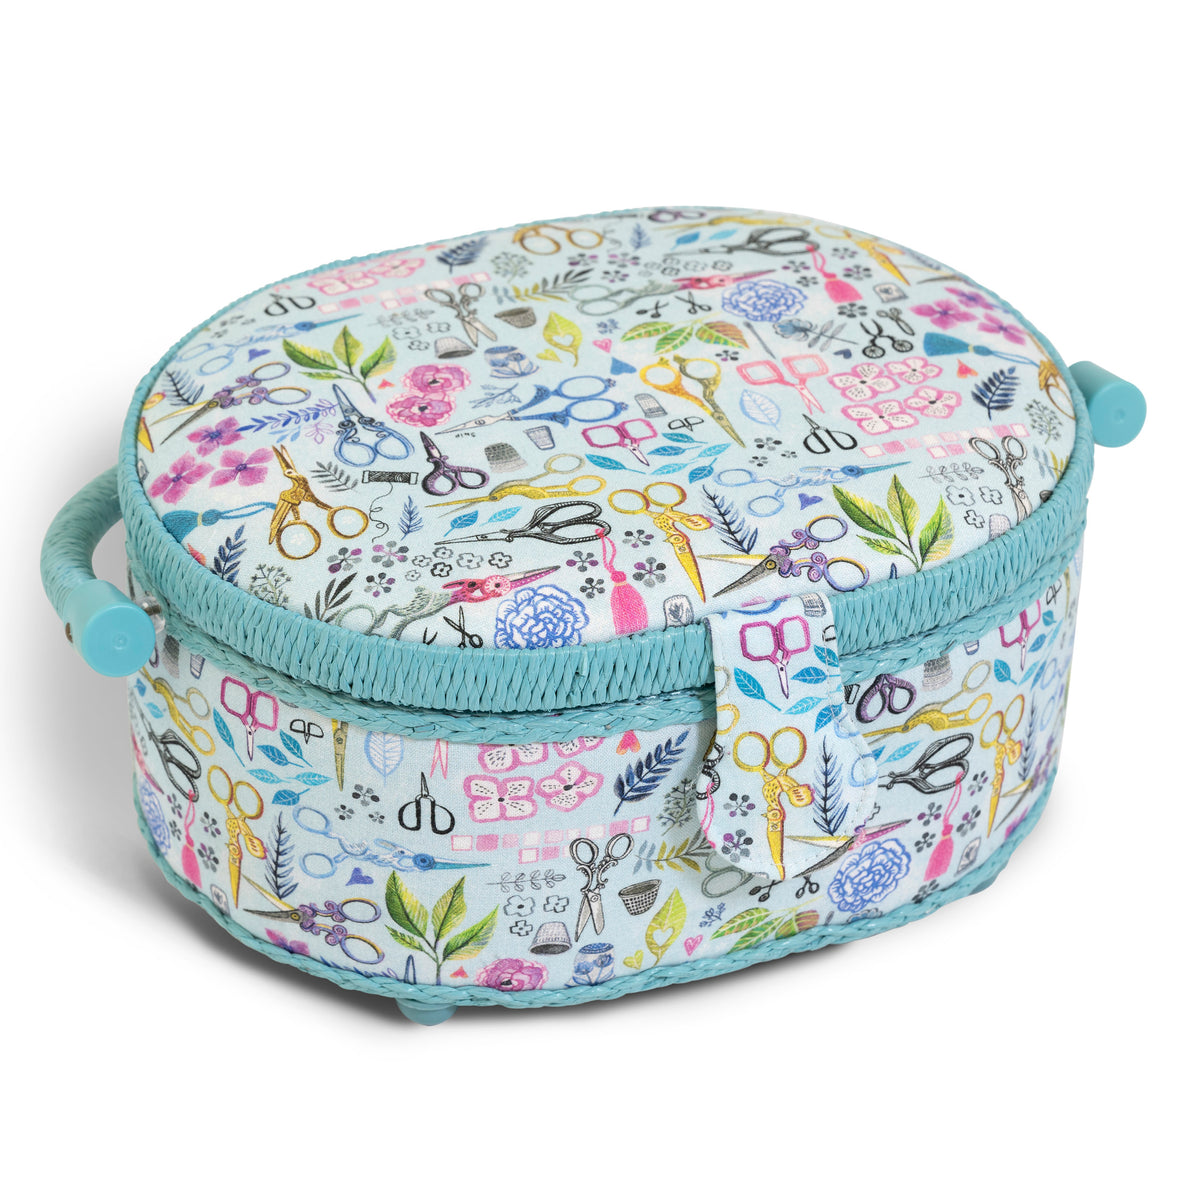 Dritz Sewing Basket Embroidery Set, Small